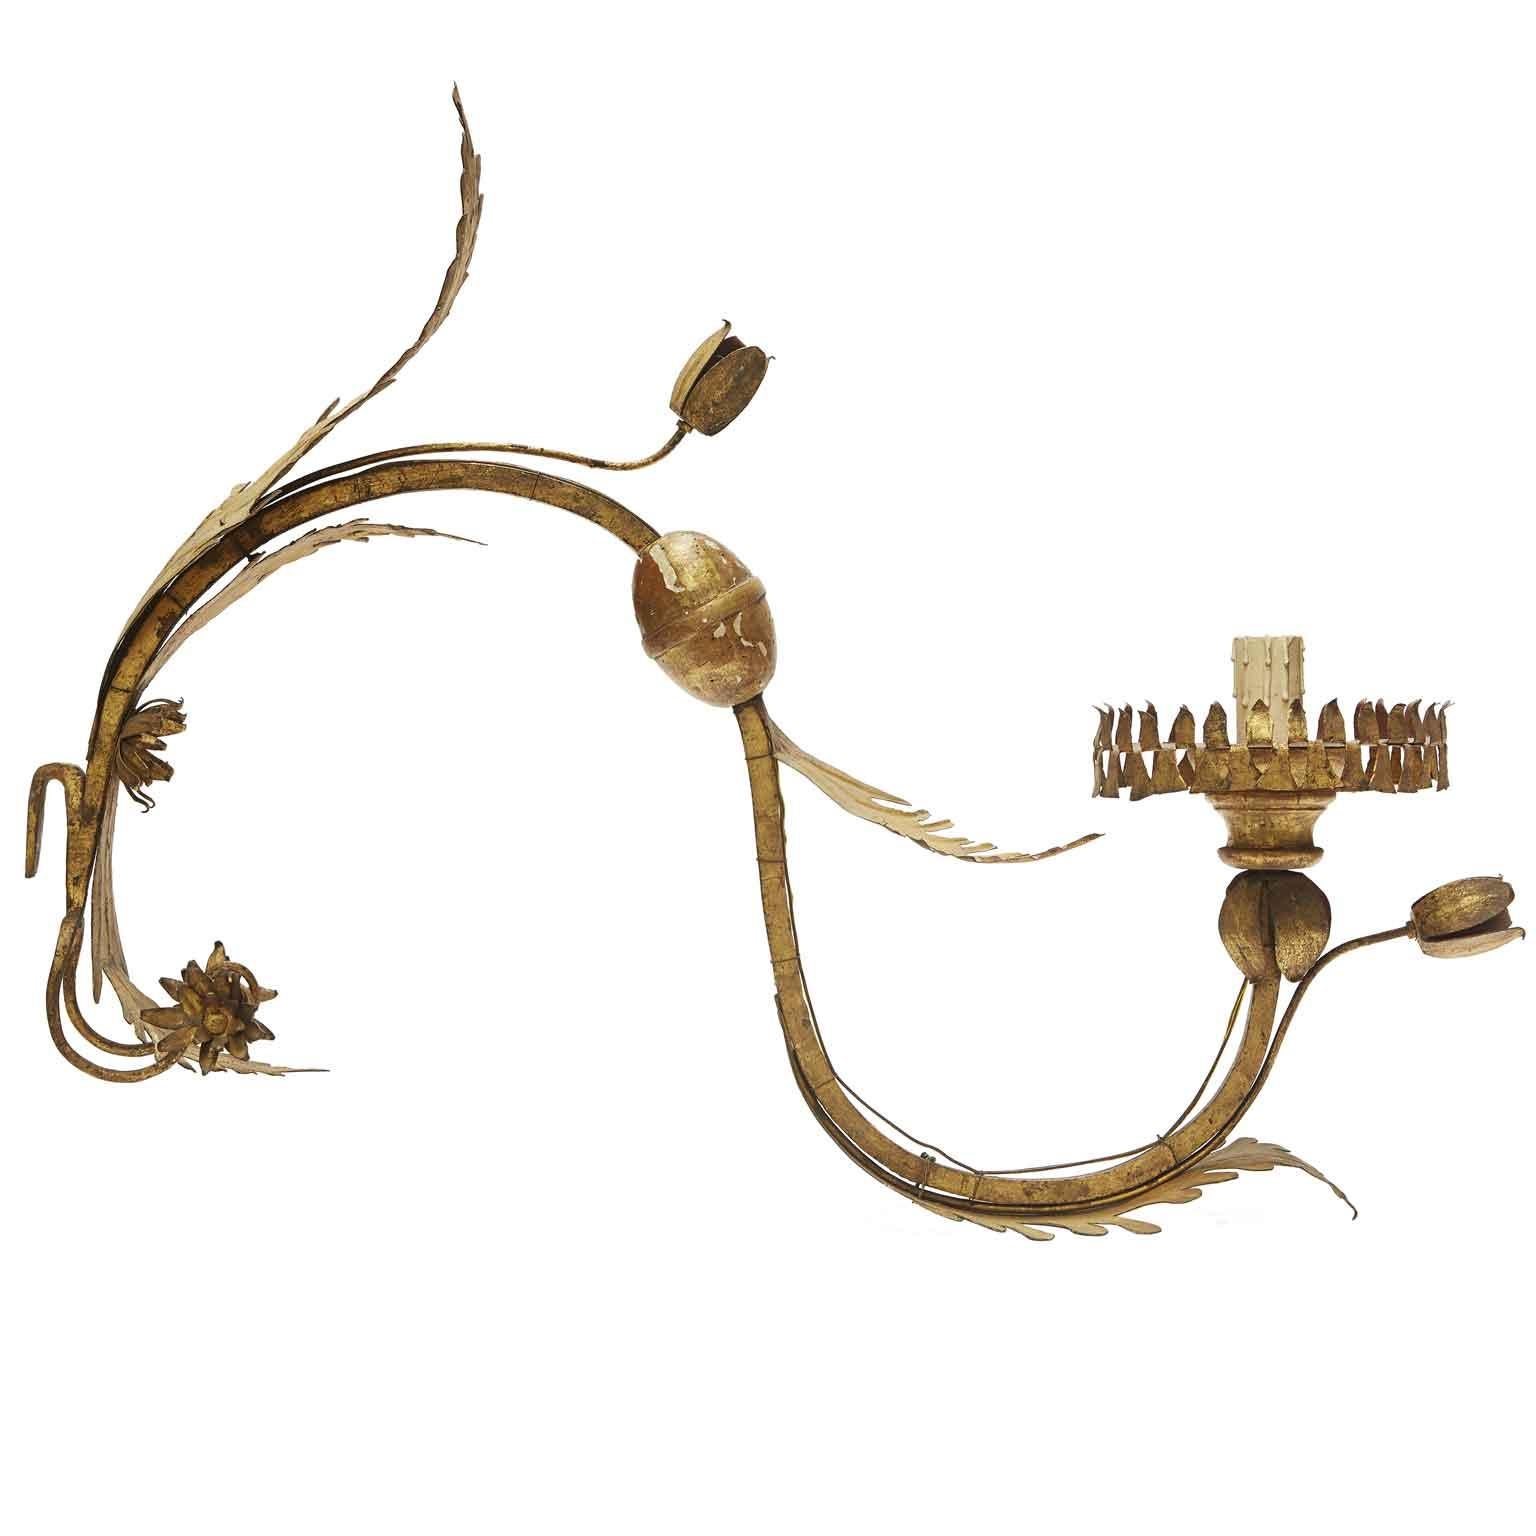 Three Gilded Appliques 1700 Wrought Iron Candle Holder Arms in Leafy and and Floral Motifs, lot of three antique wall lights, candle holder arms  eighteenth-century period, curved arms with double volutes, with important dimensions, entirely